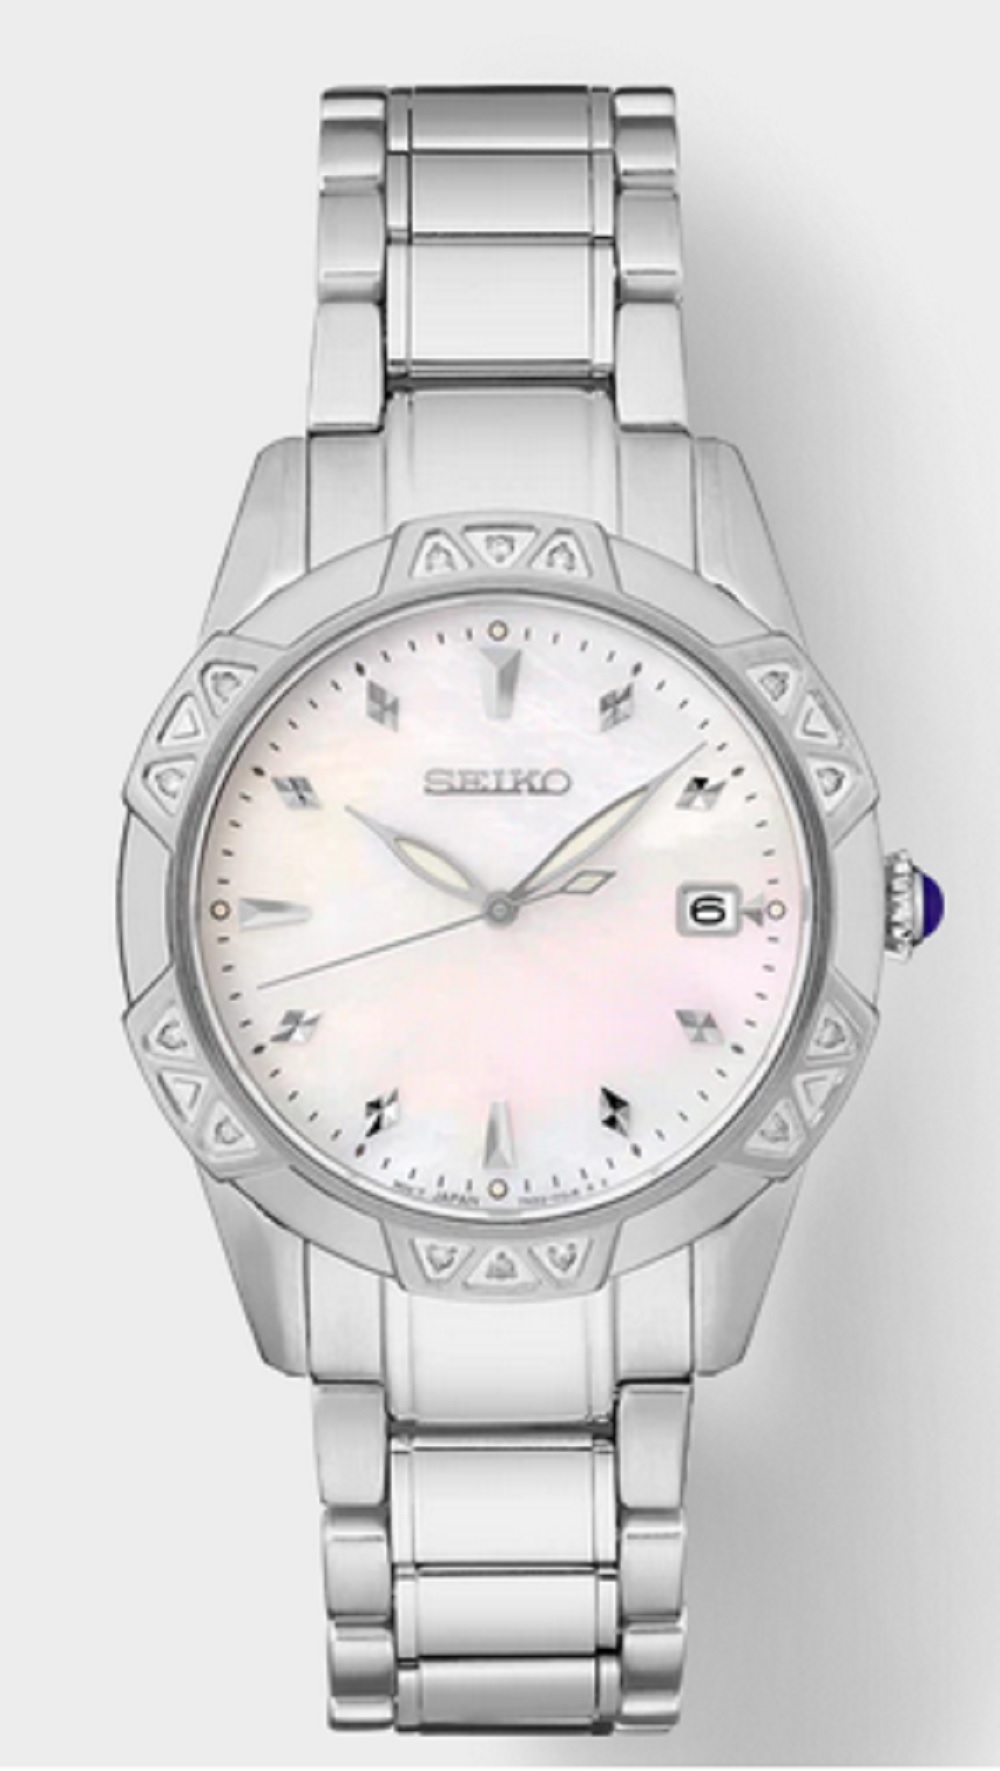 Seiko Women's Diamond Collection Stainless Steel Mother-of-Pearl Dial Watch